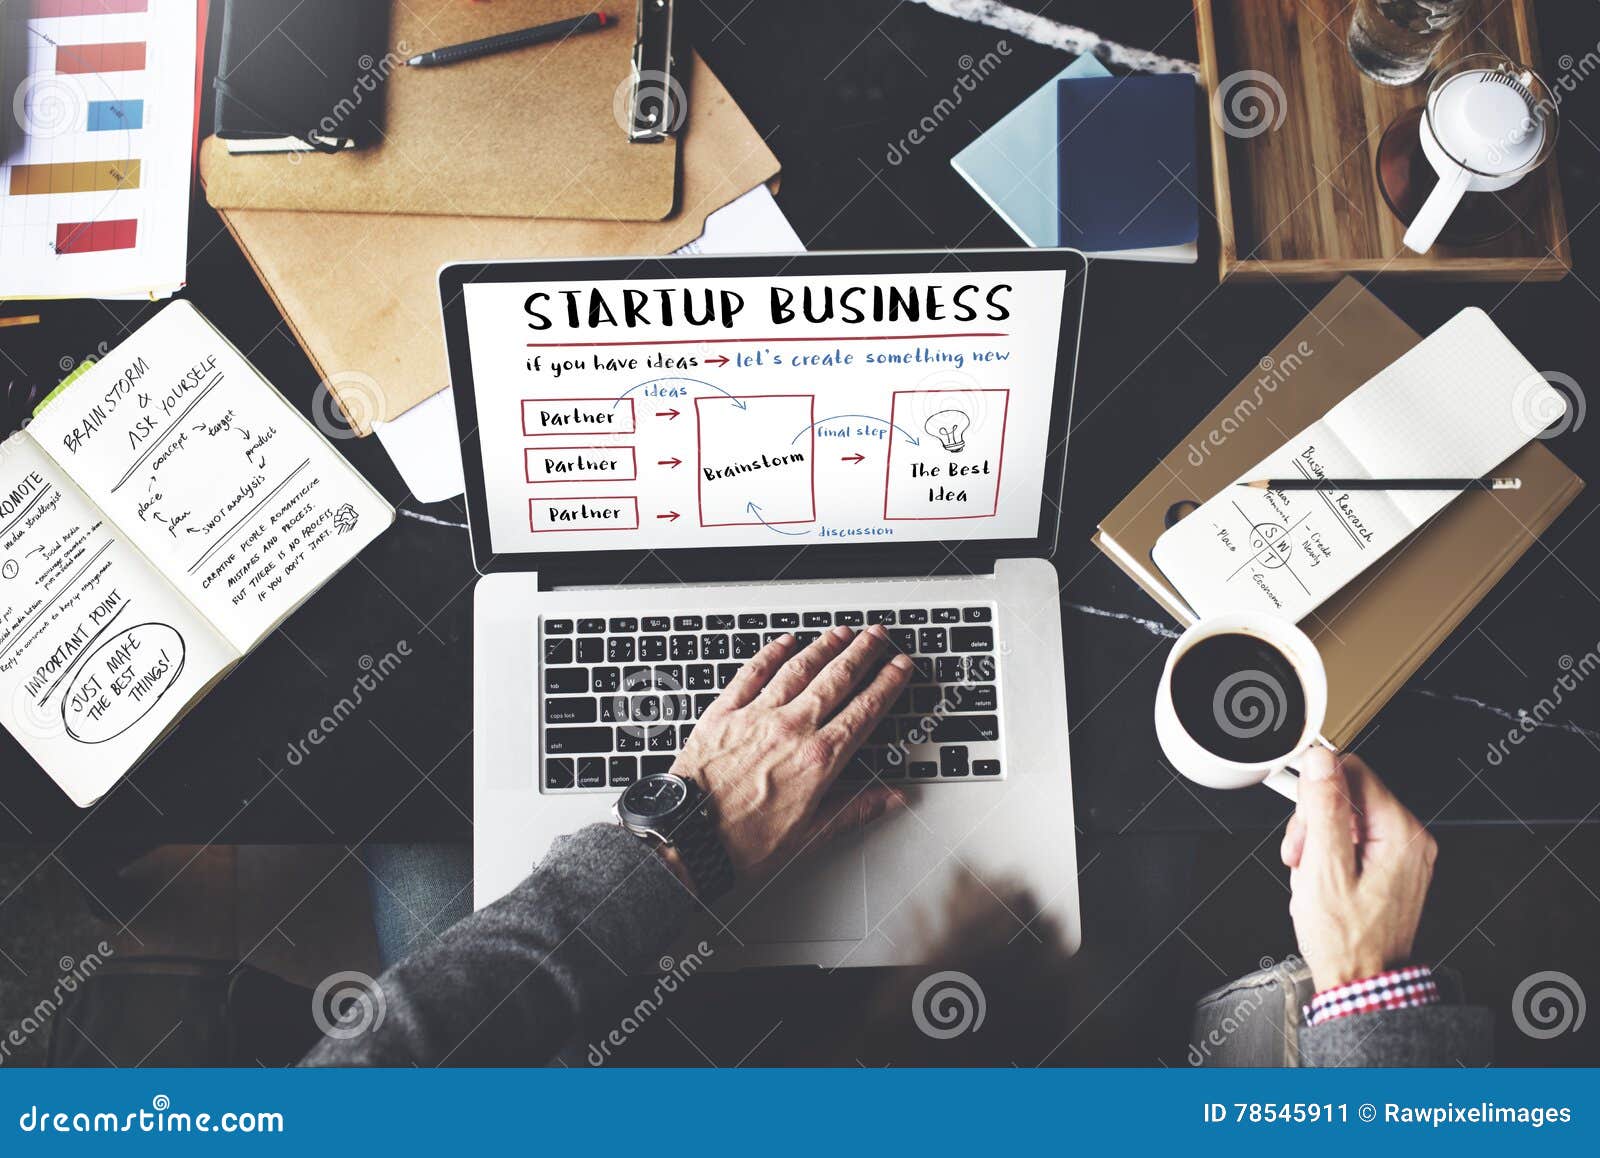 startup business plan brainstorming graphic concept